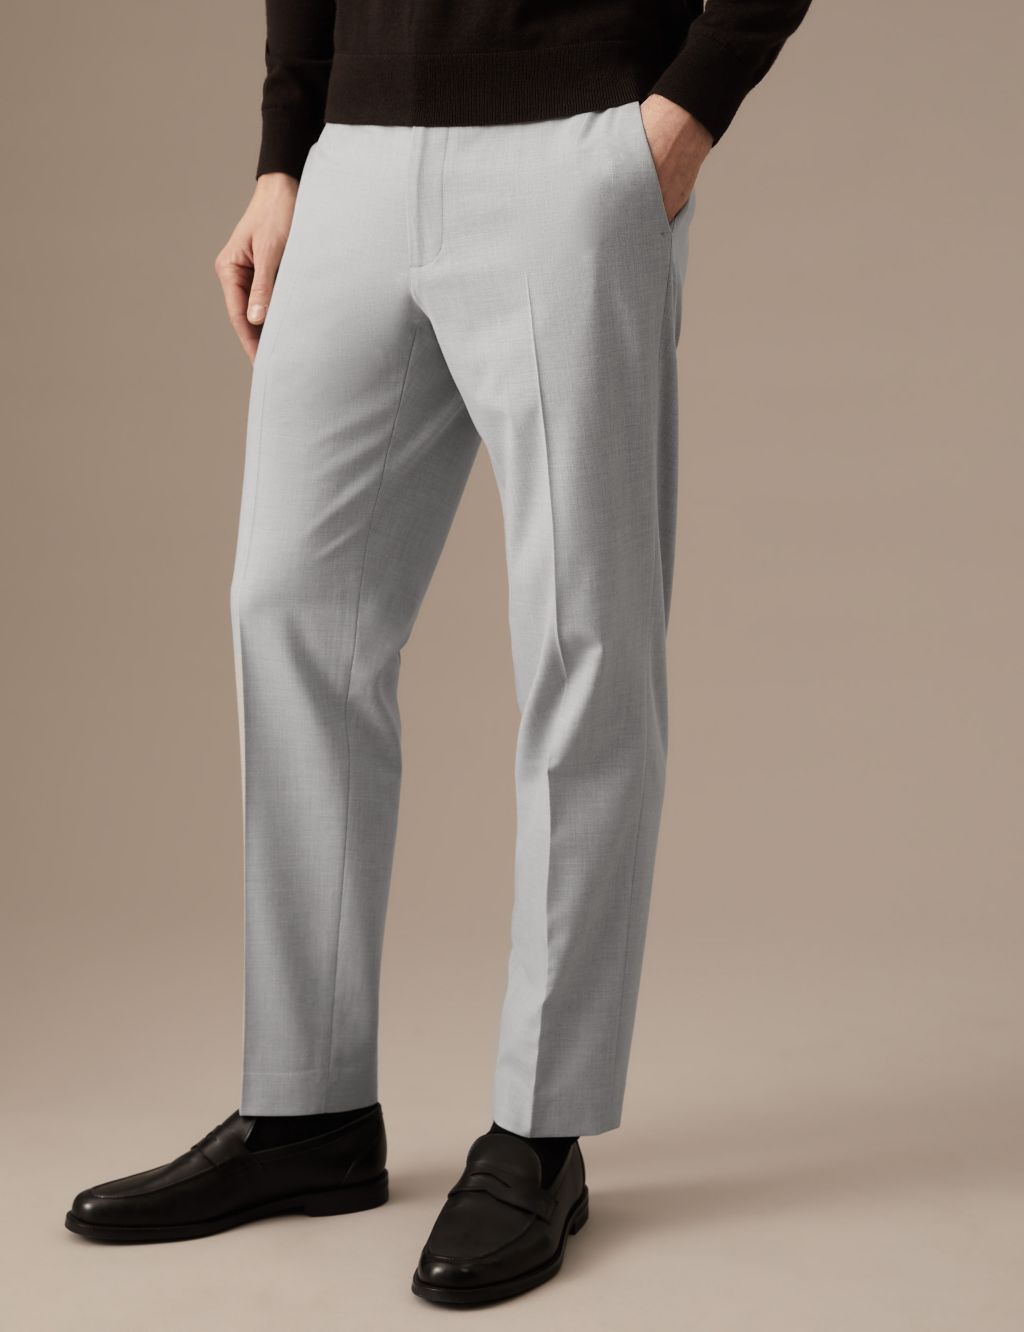 Textured 360 Flex Trousers image 2